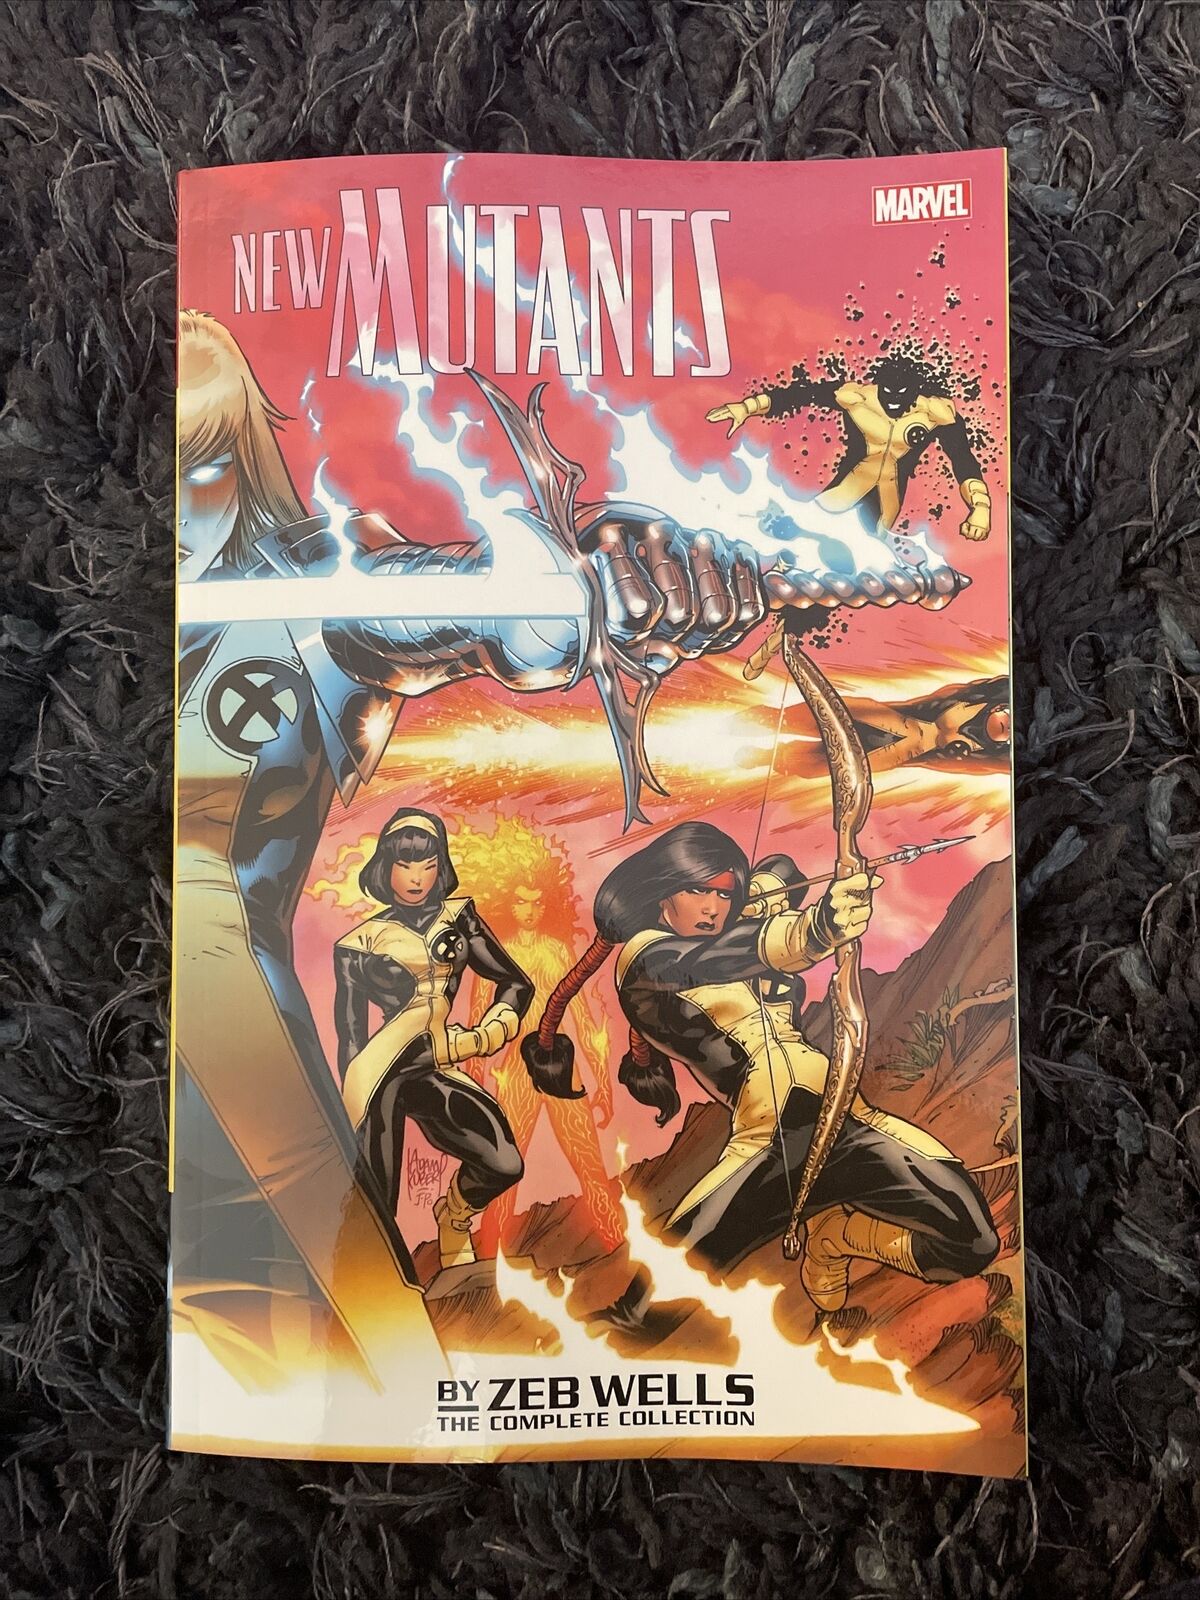 New Mutants by Zeb Wells: The Complete Collection (Marvel, 2018) Graphic Novel